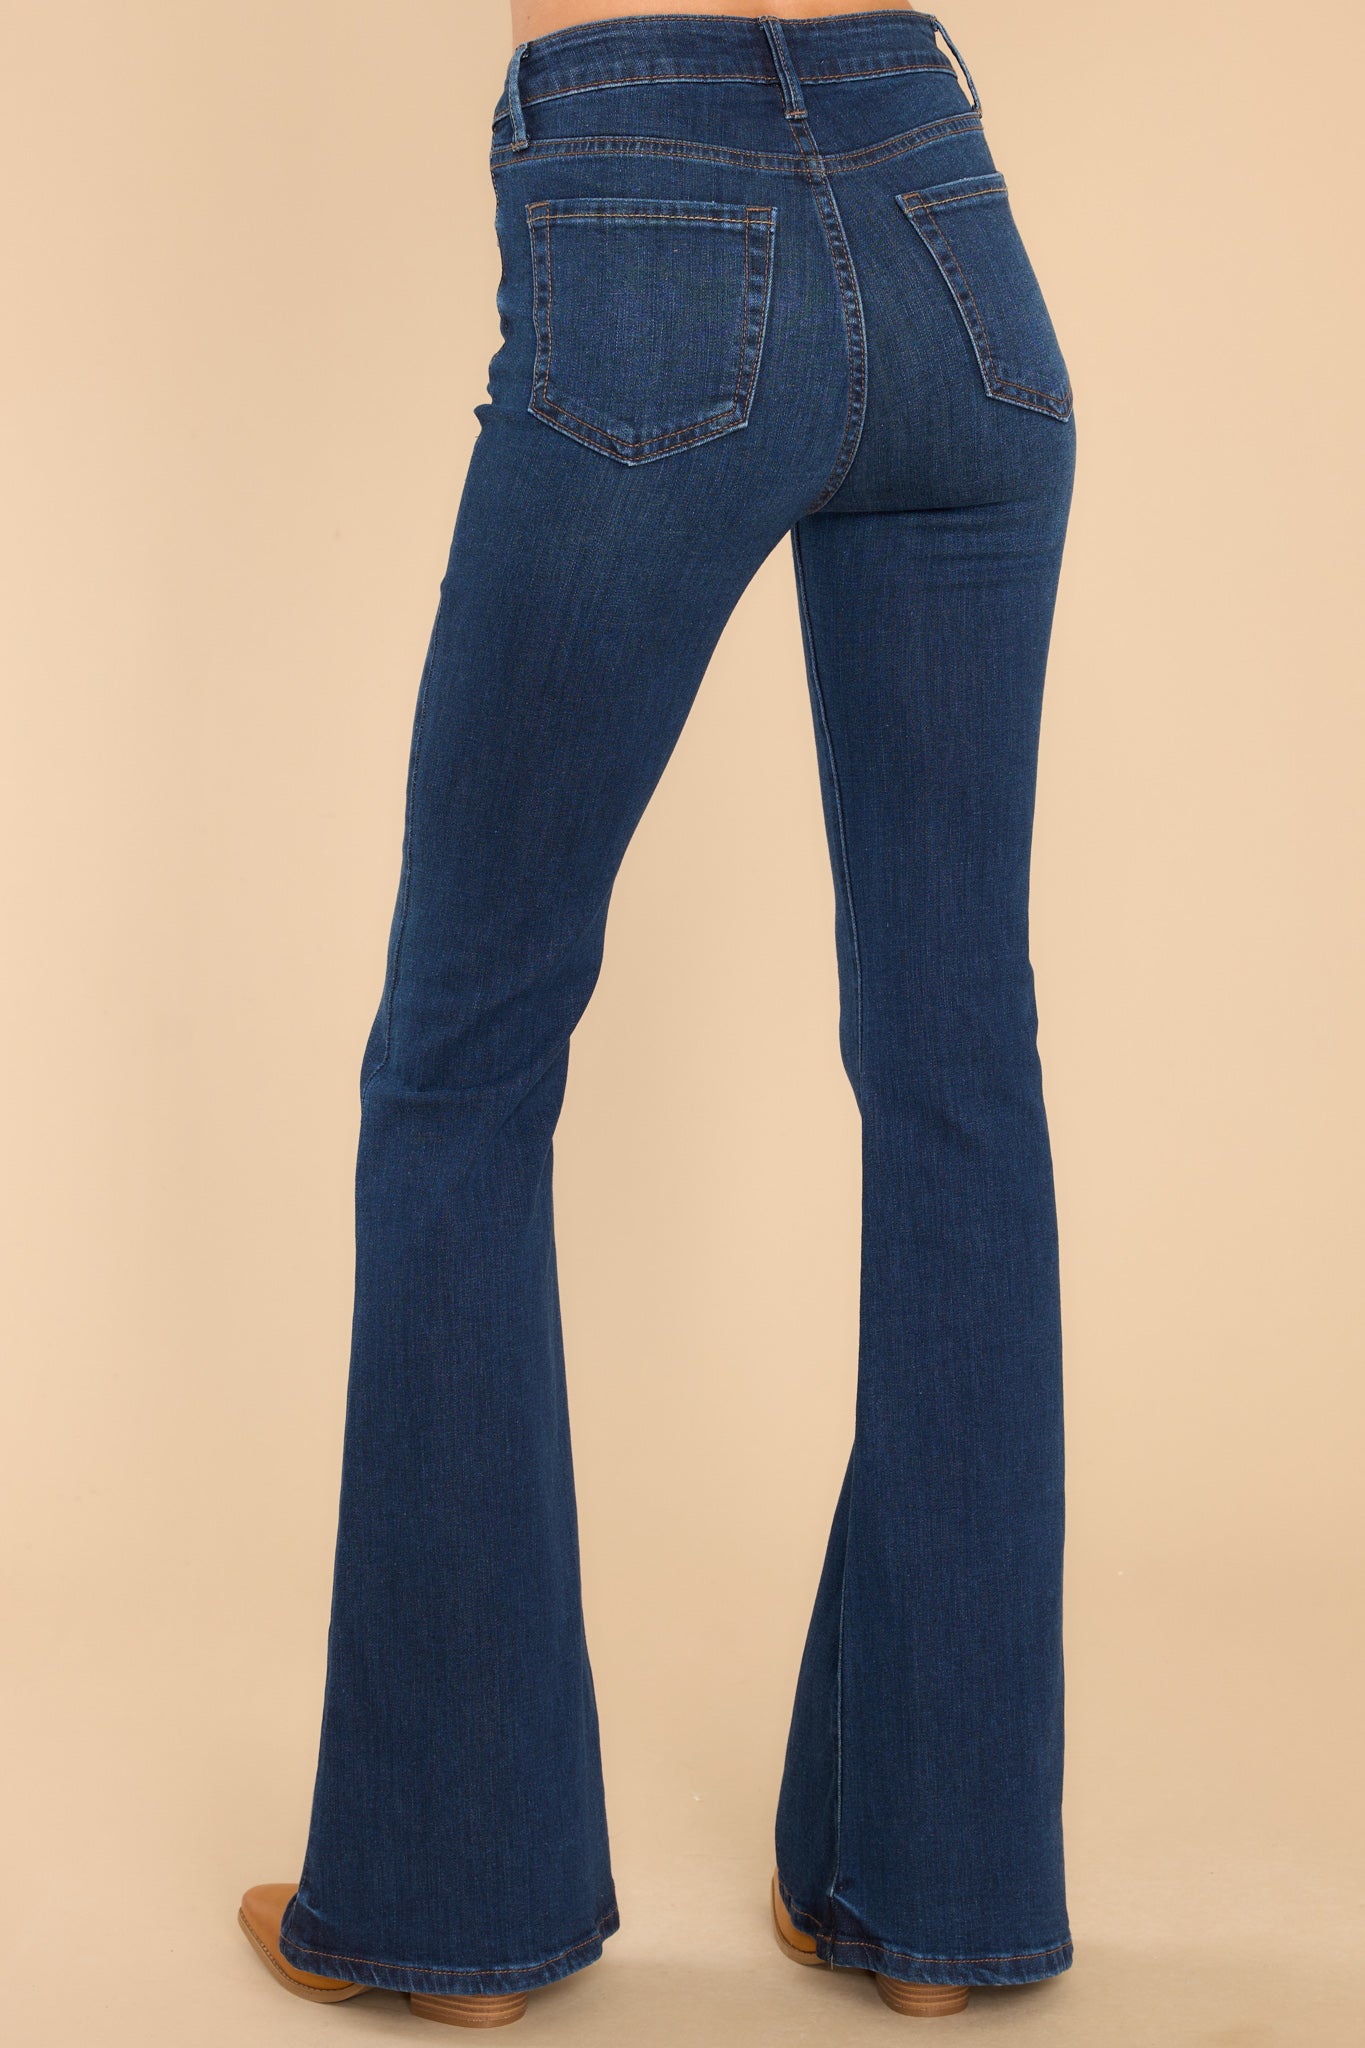 Back view of these jeans that feature a high waist fit, belt loops, zipper and button closure, functional pockets, and a bell bottom flare.